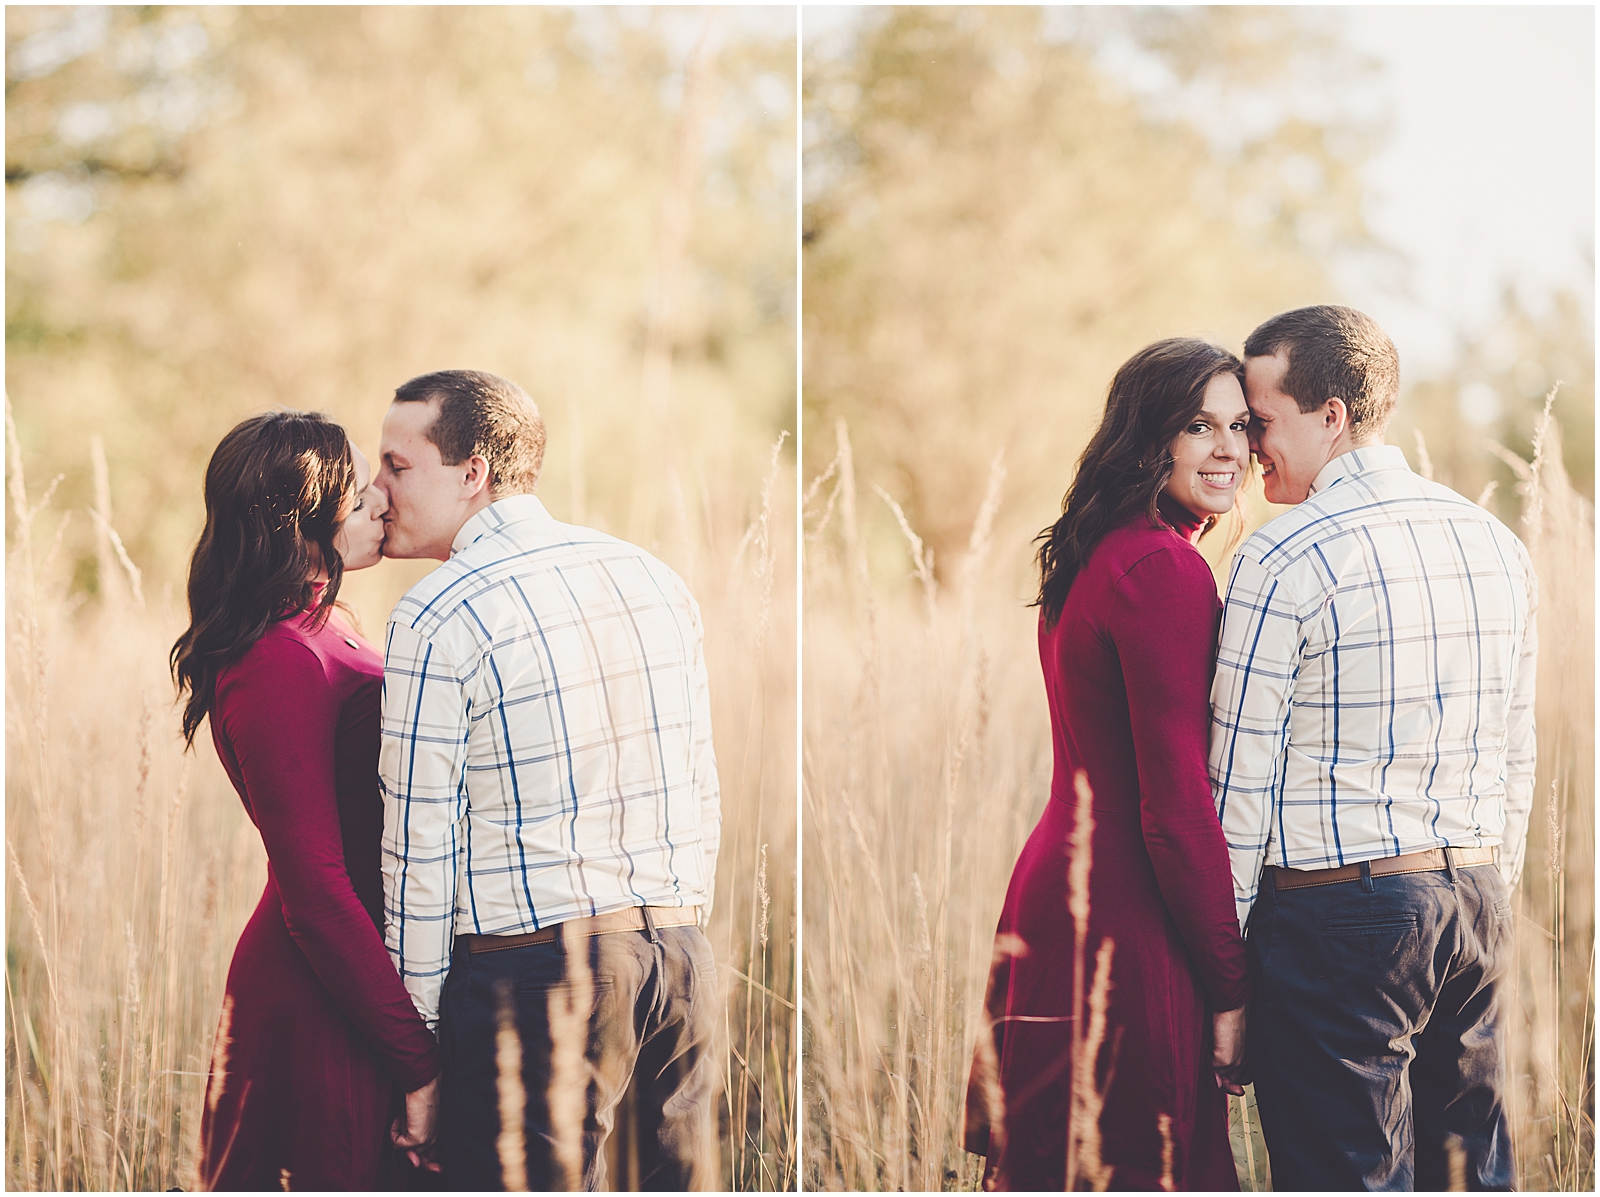 Caroline and Cody's fall Linne Woods engagement in Morton Grove, IL with Chicagoland wedding photographer Kara Evans Photographer.